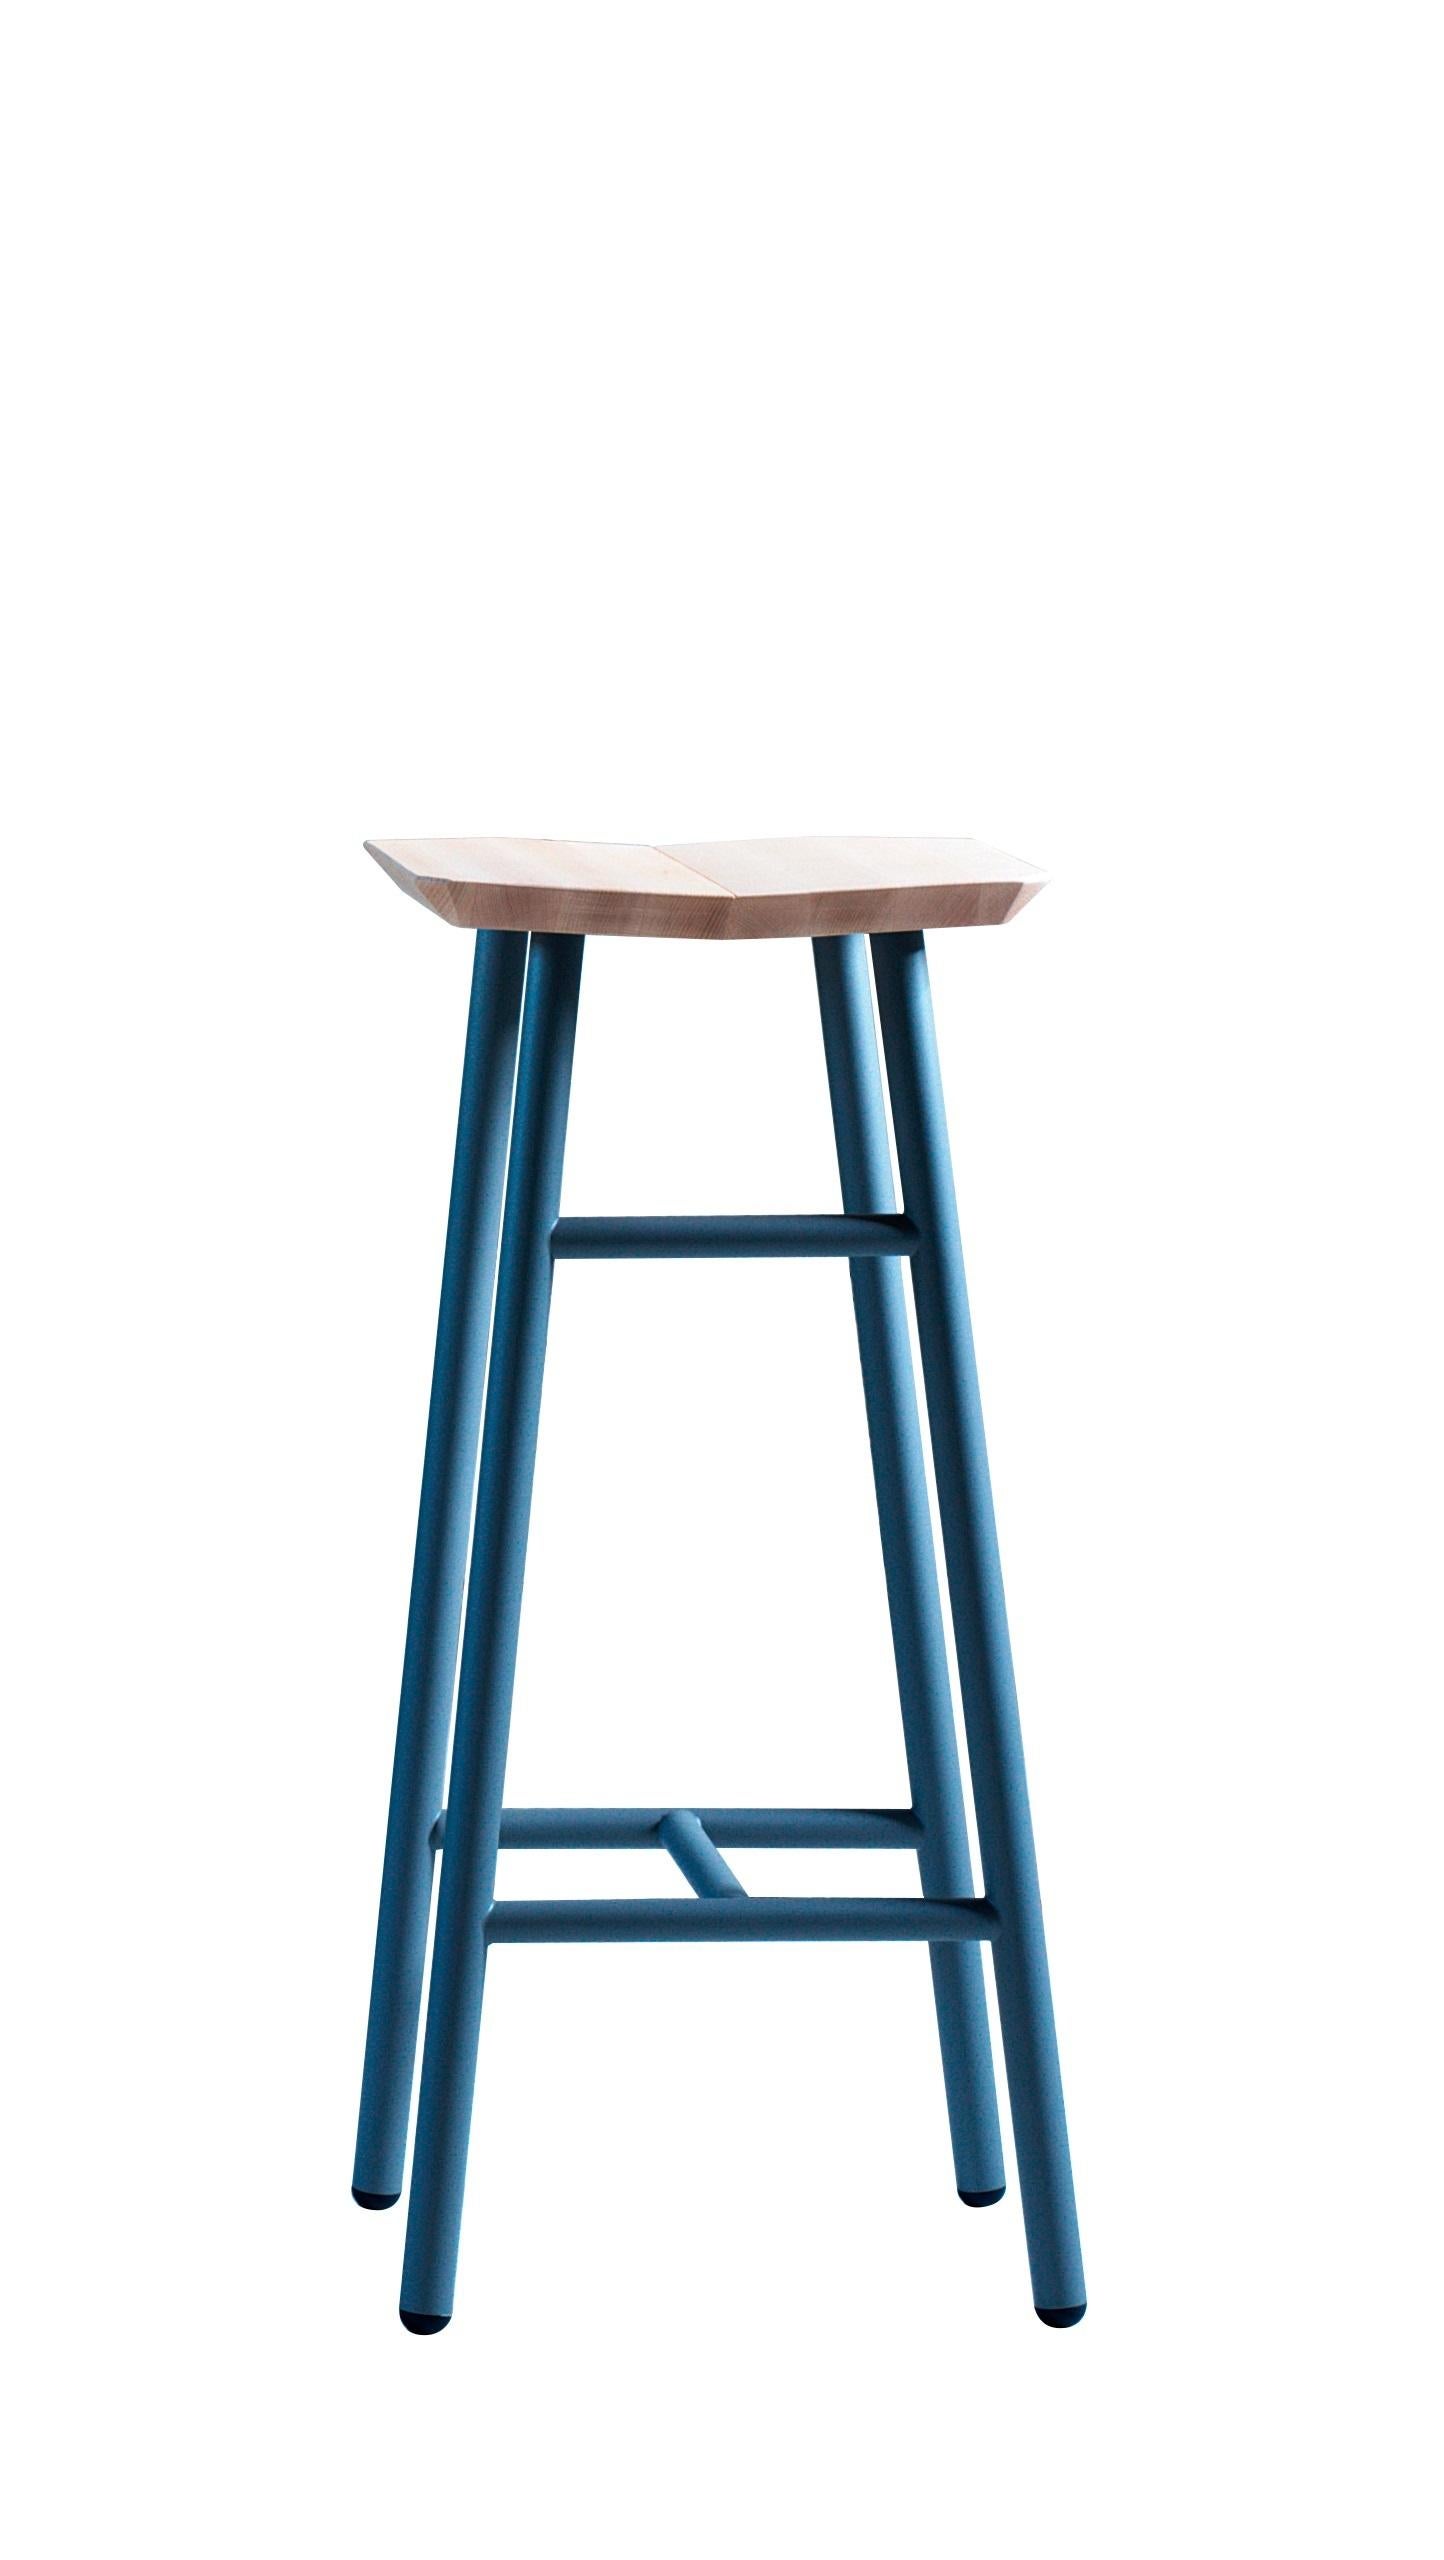 Dedo High Stool in Steel Lacquer Legs, Wooden Seat, by Miniforms Lab